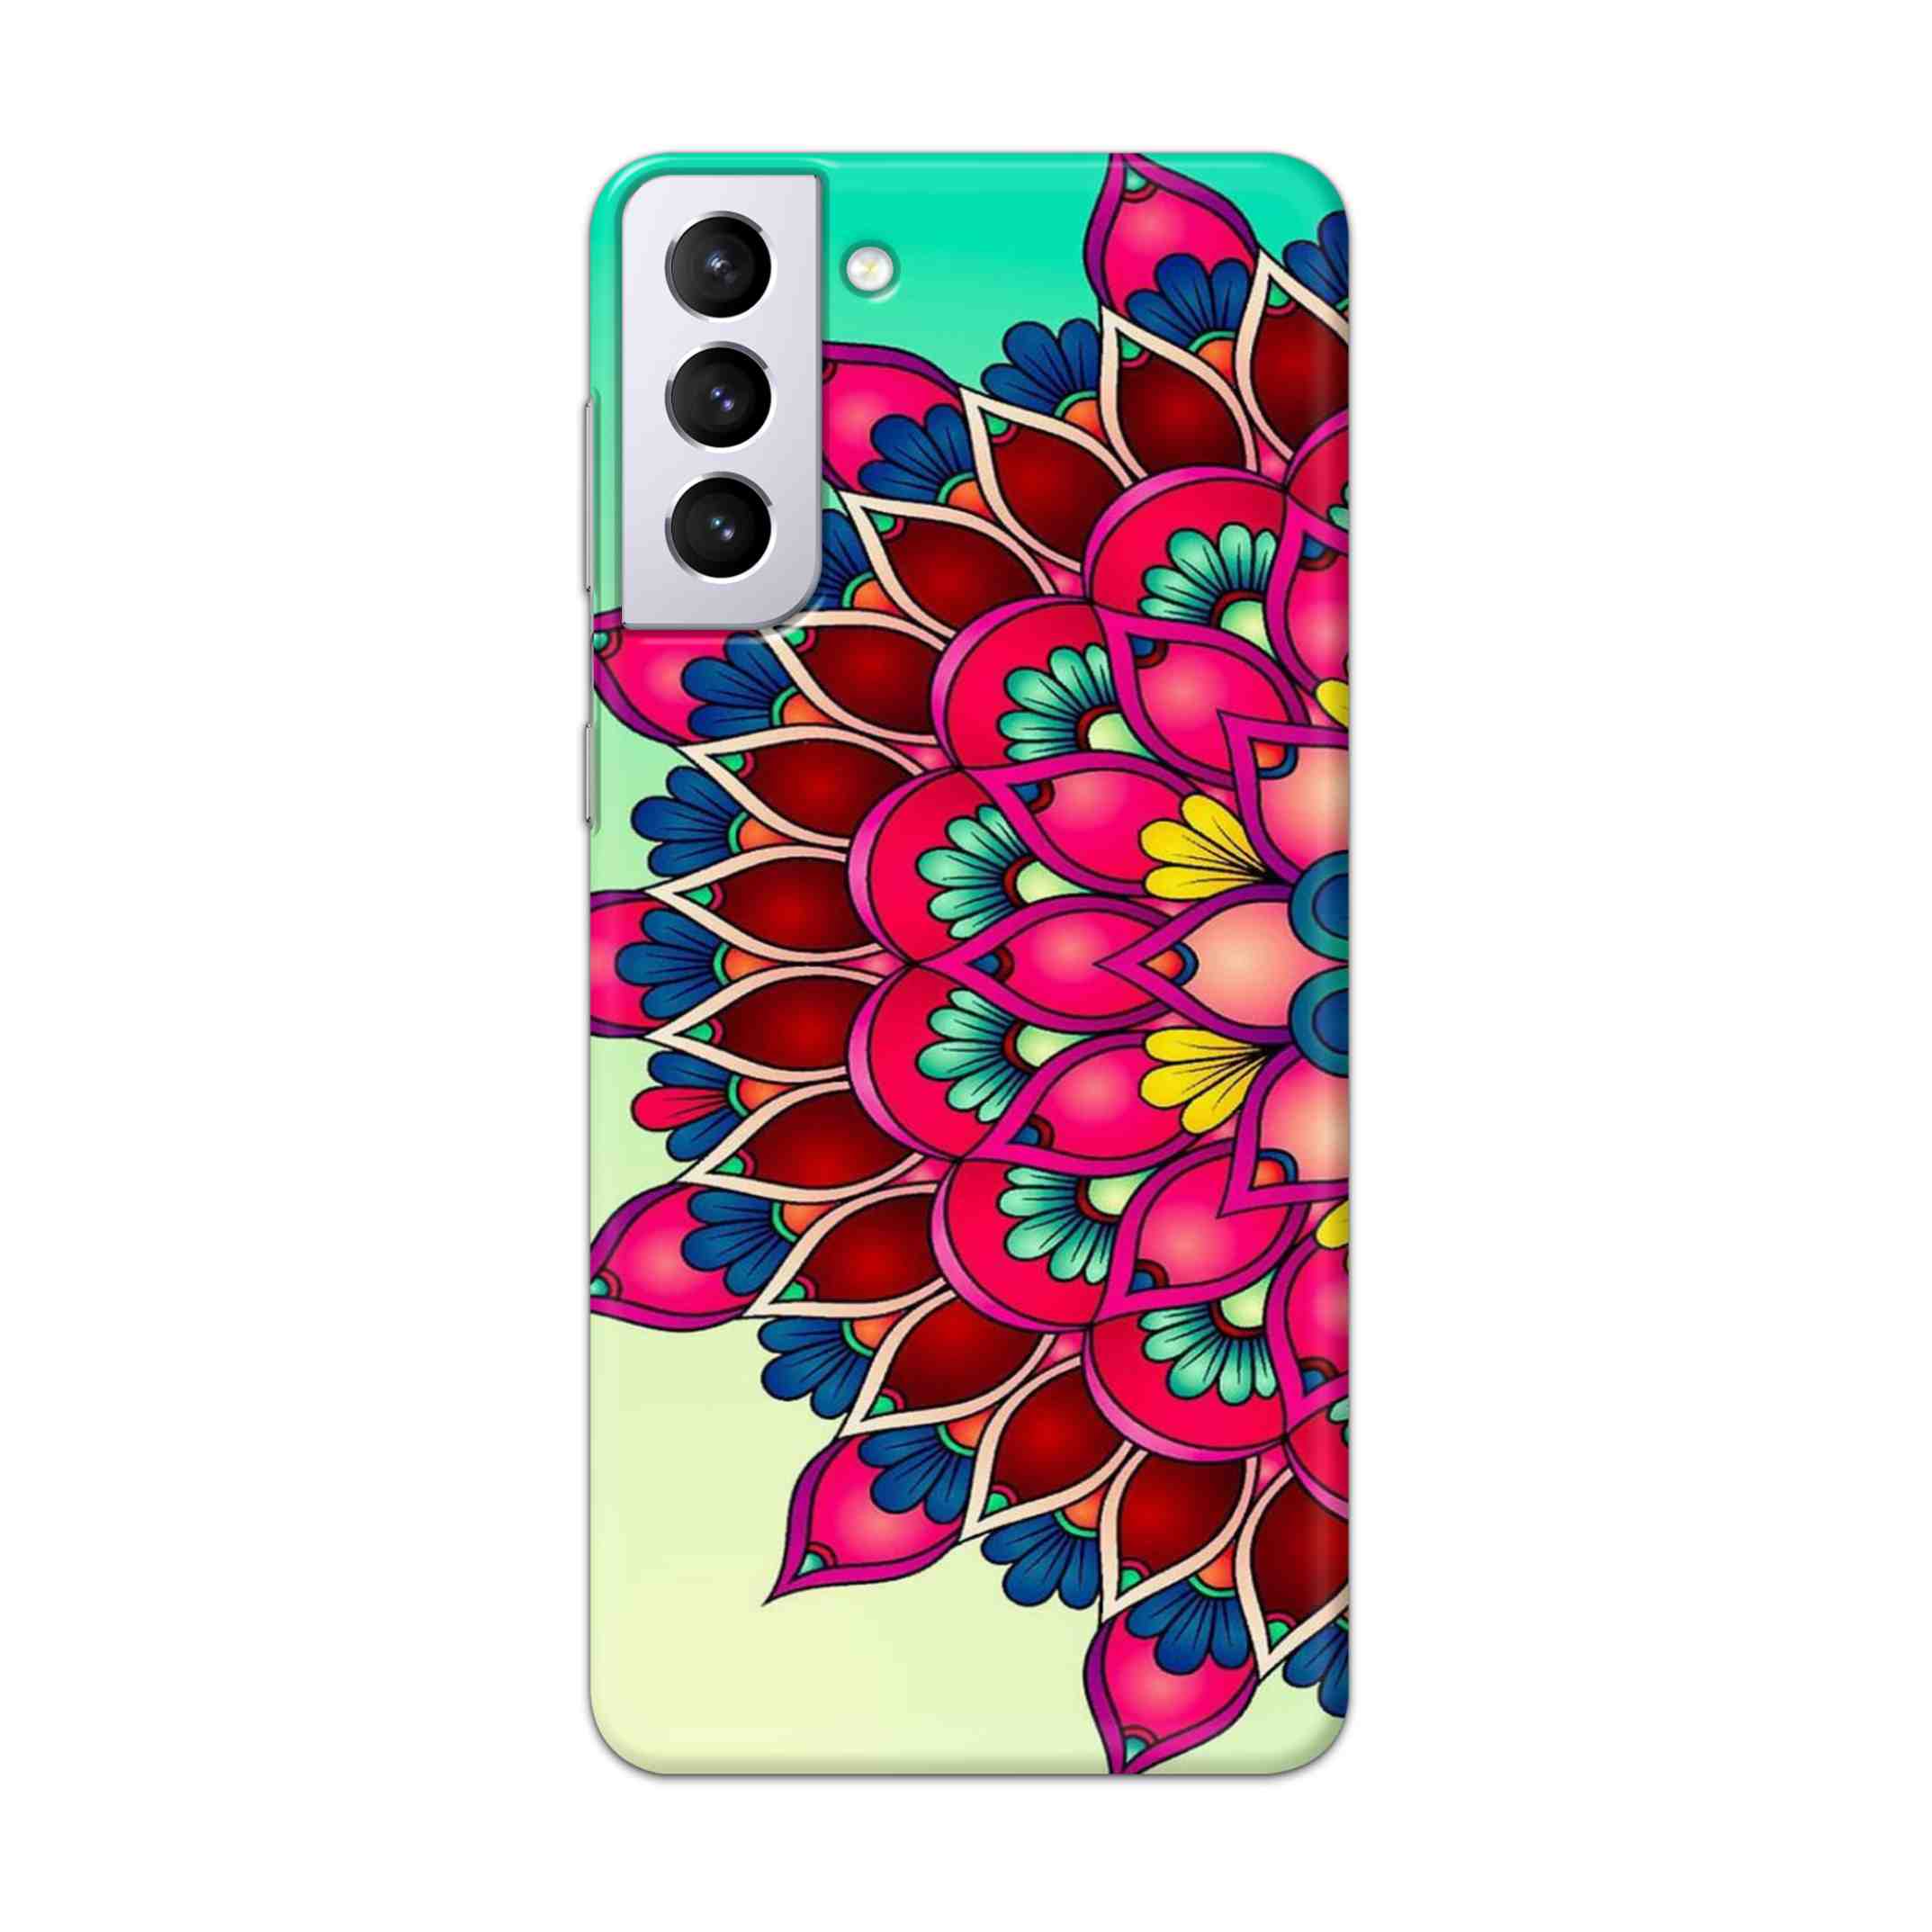 Buy Lotus Mandala Hard Back Mobile Phone Case Cover For Samsung Galaxy S21 Plus Online